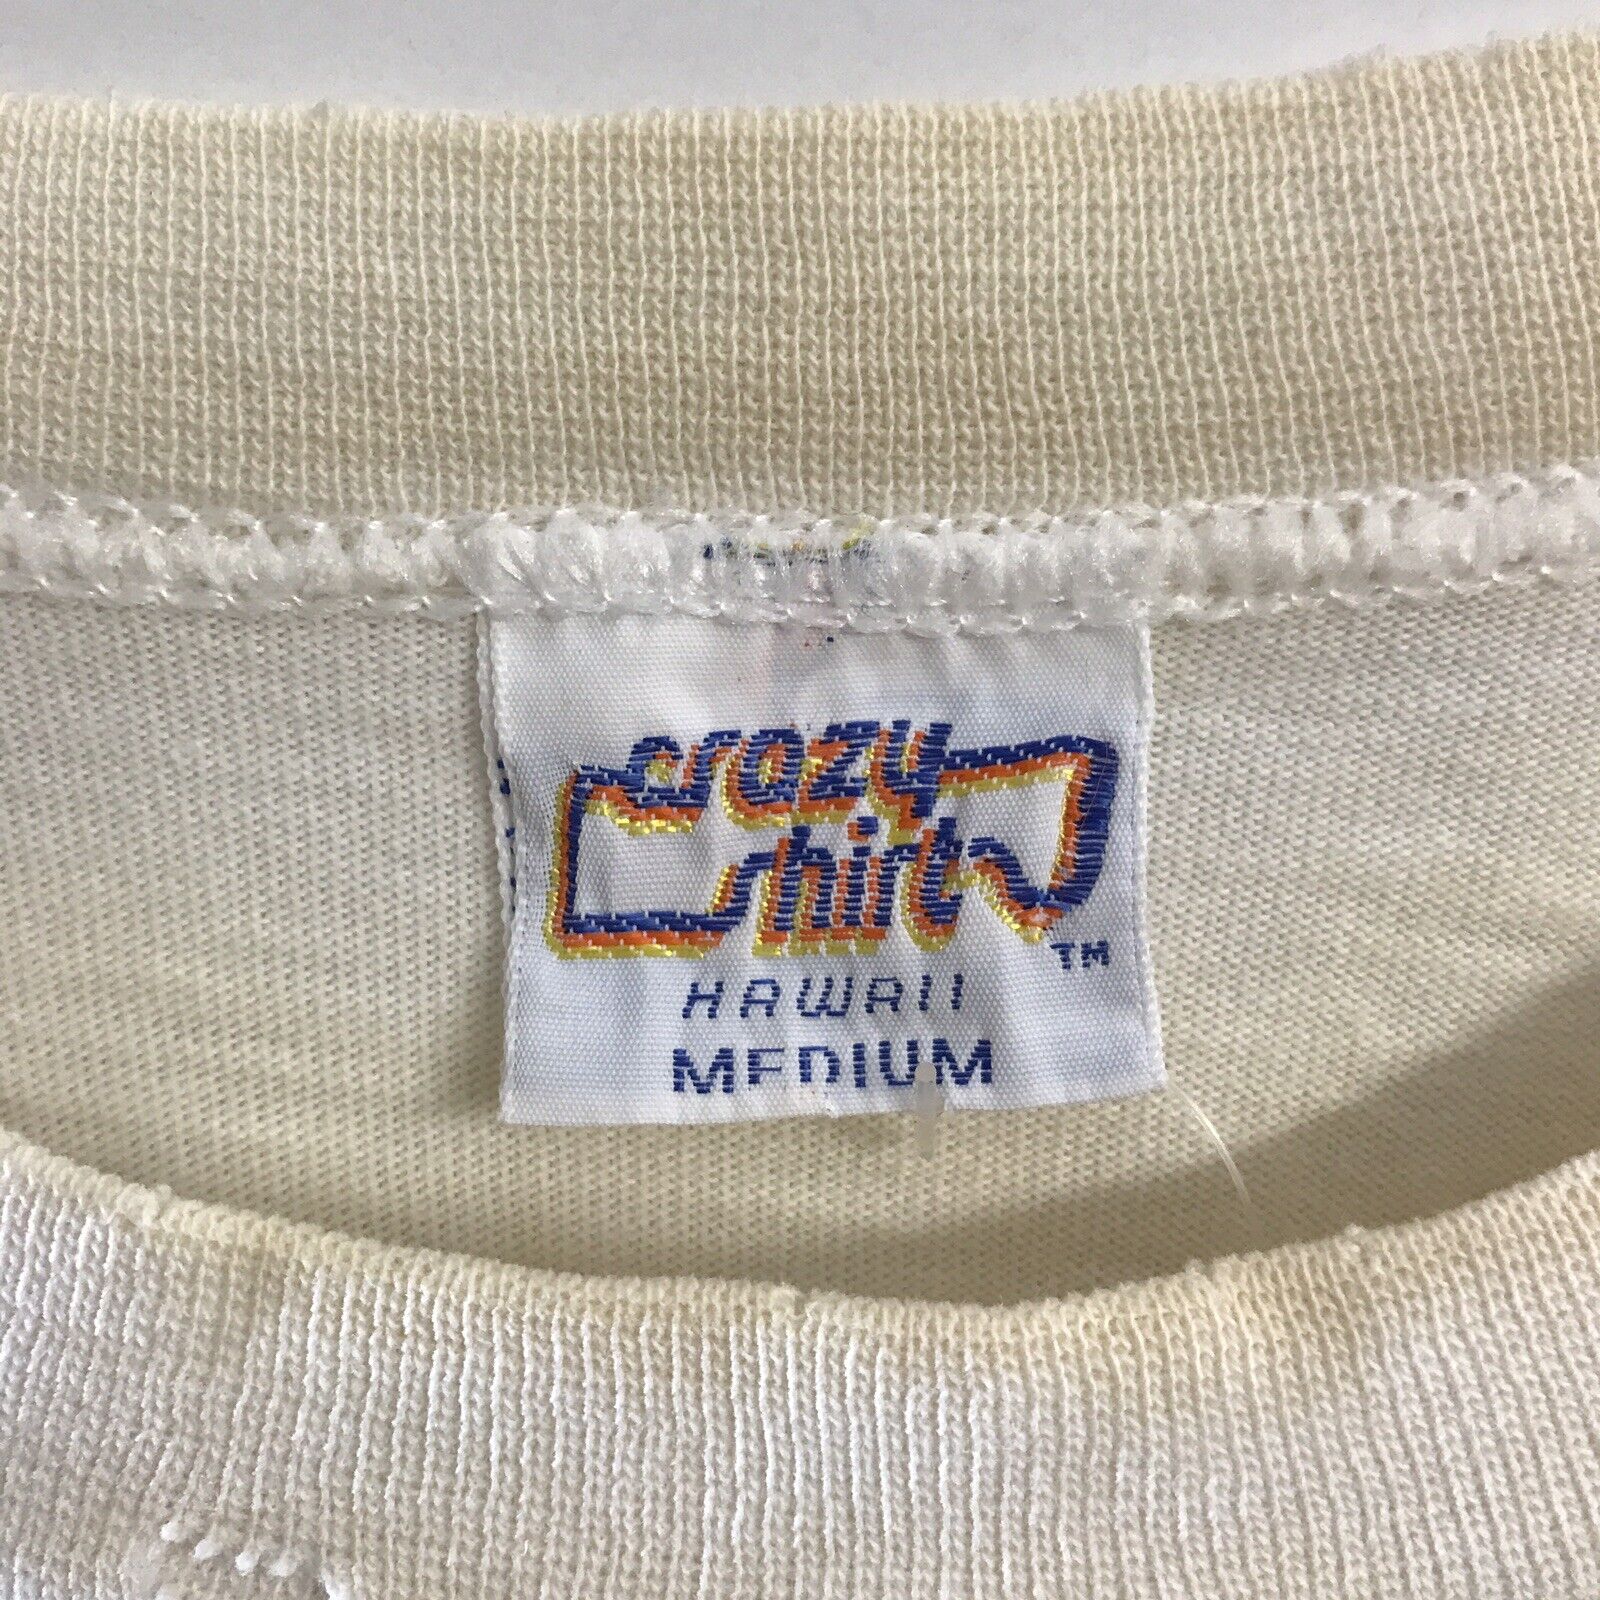 crazy shirts tag 1984 and 1985 new design with no fill in the border with TM